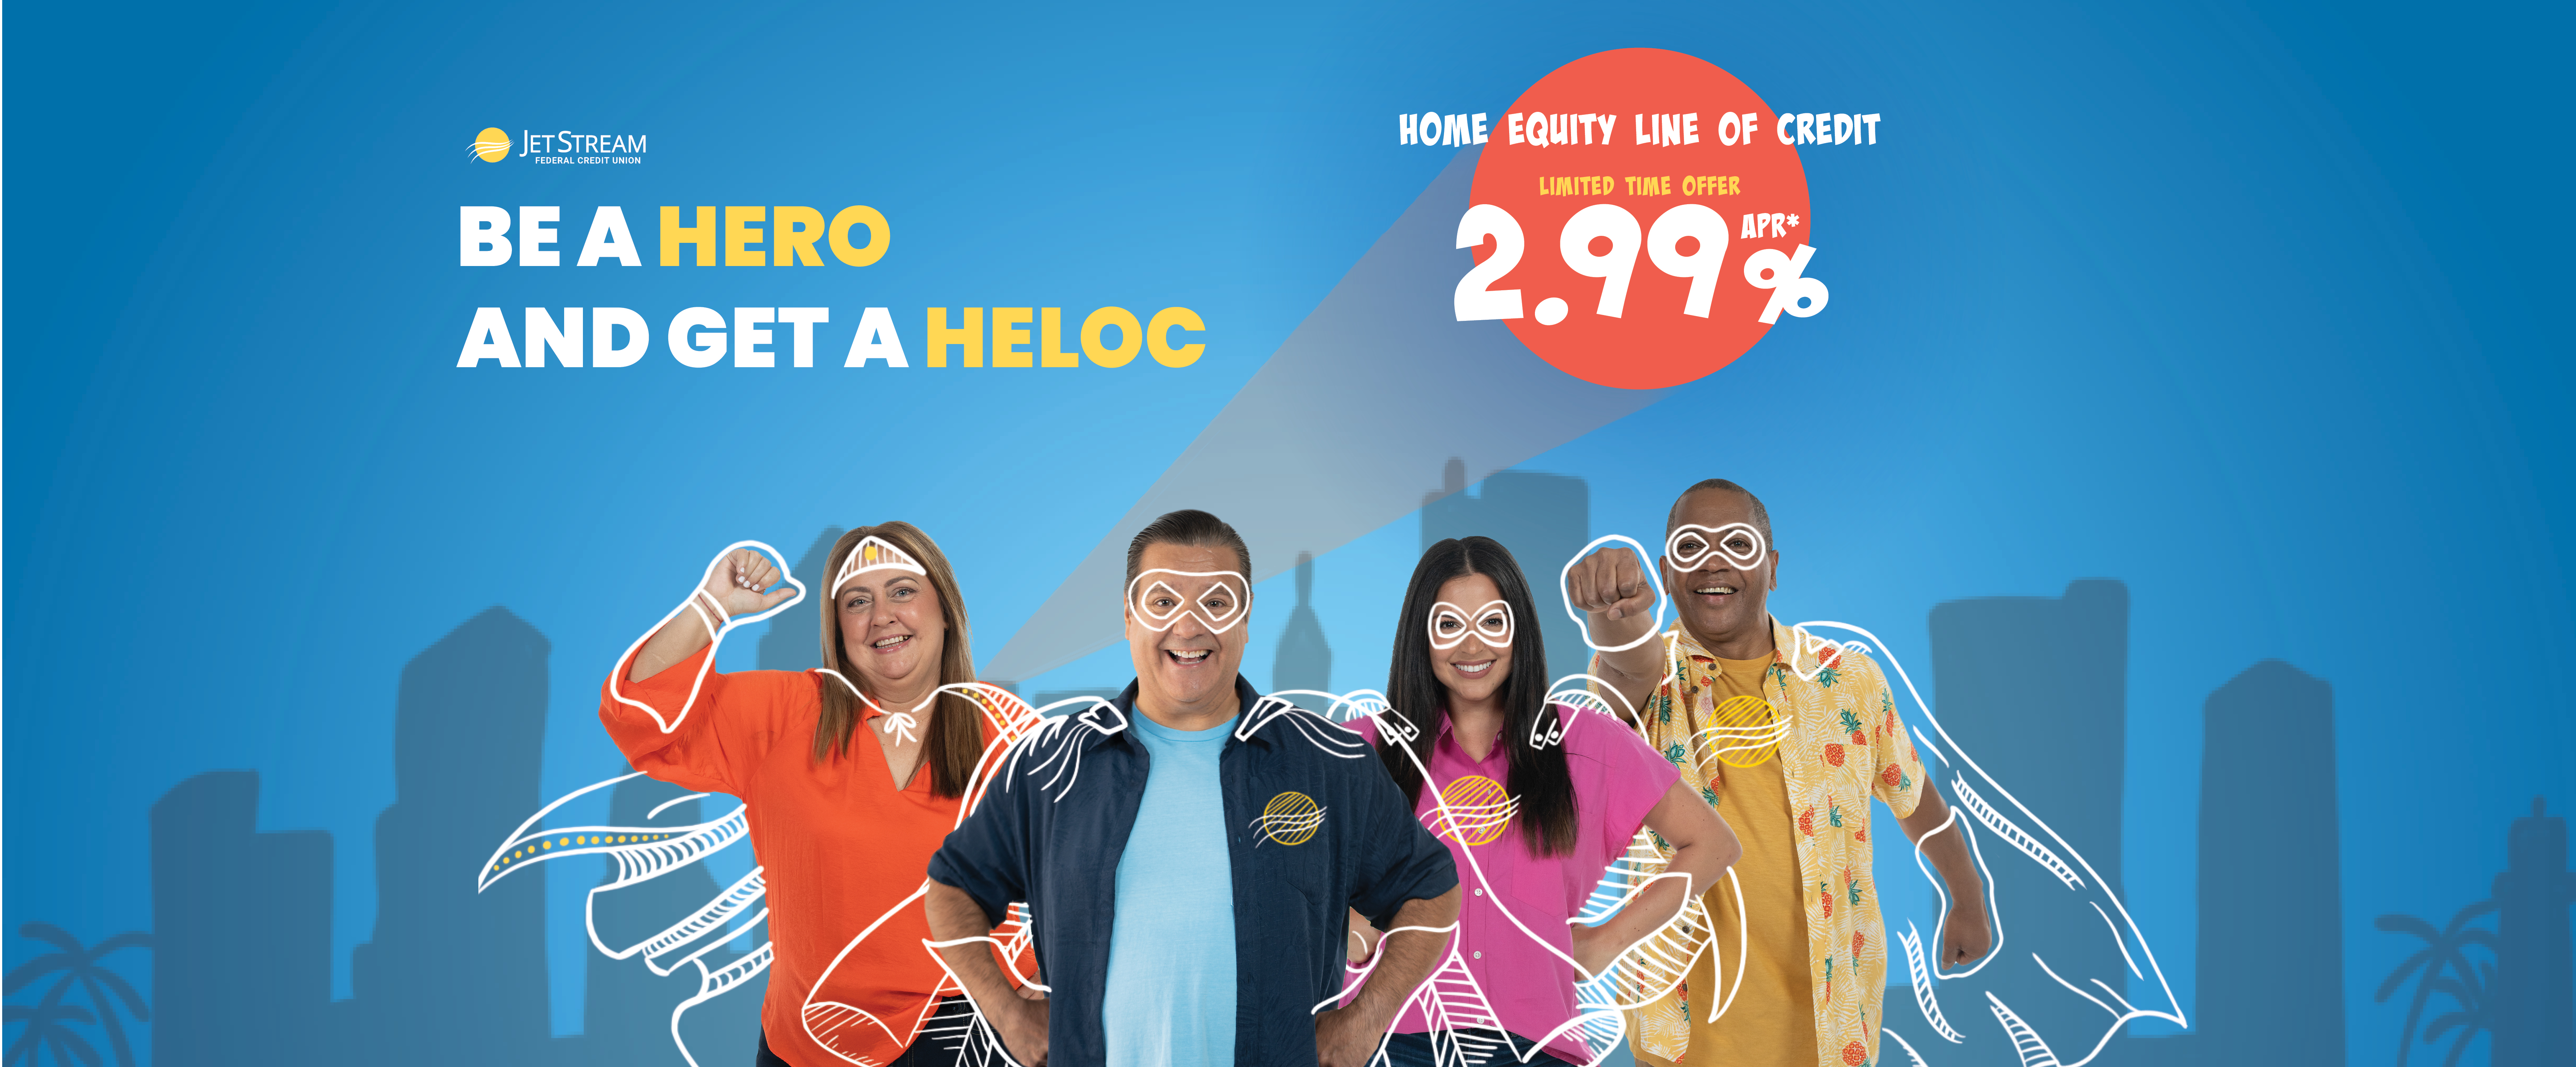 Be a hero and get a HELOC